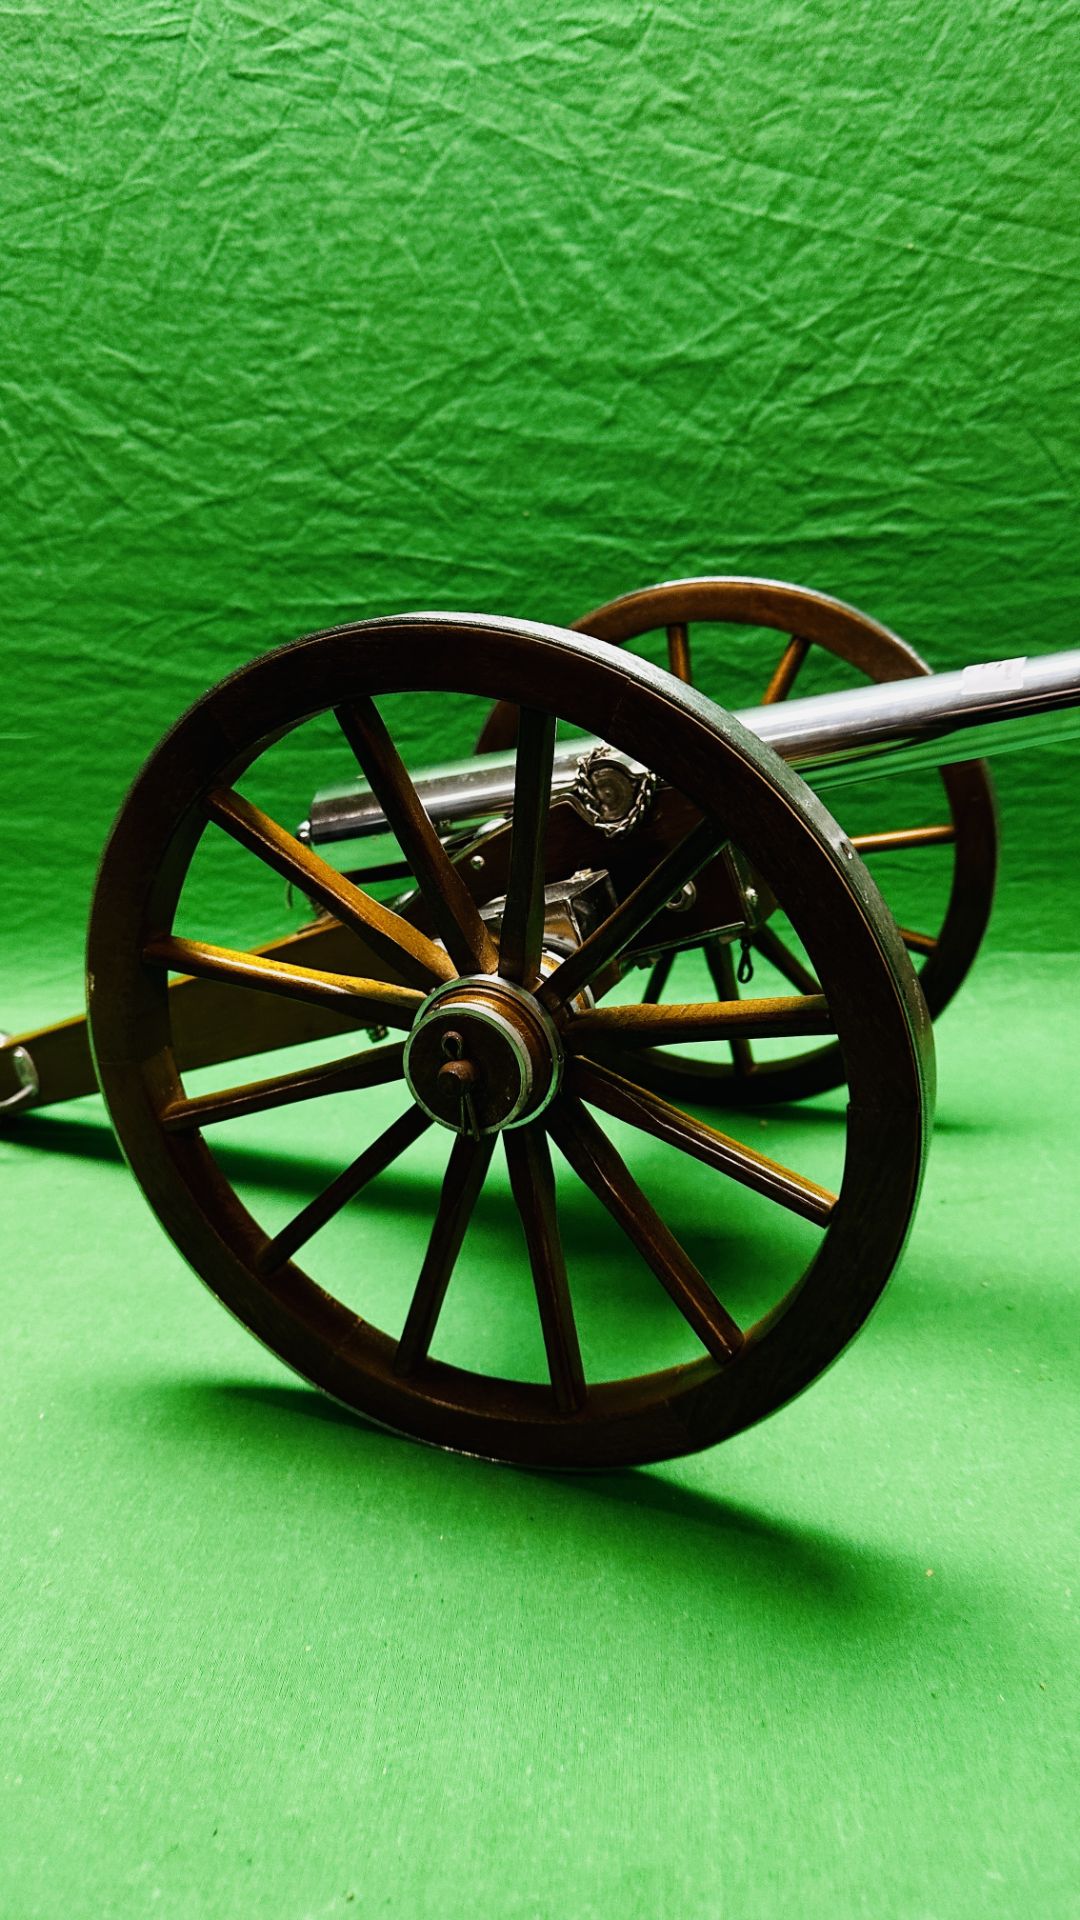 A SPANISH 75 CAL BLACK POWDER ARMAS GIL CANNON 14" BARREL MOUNTED ON A CARRIAGE. - Image 7 of 15